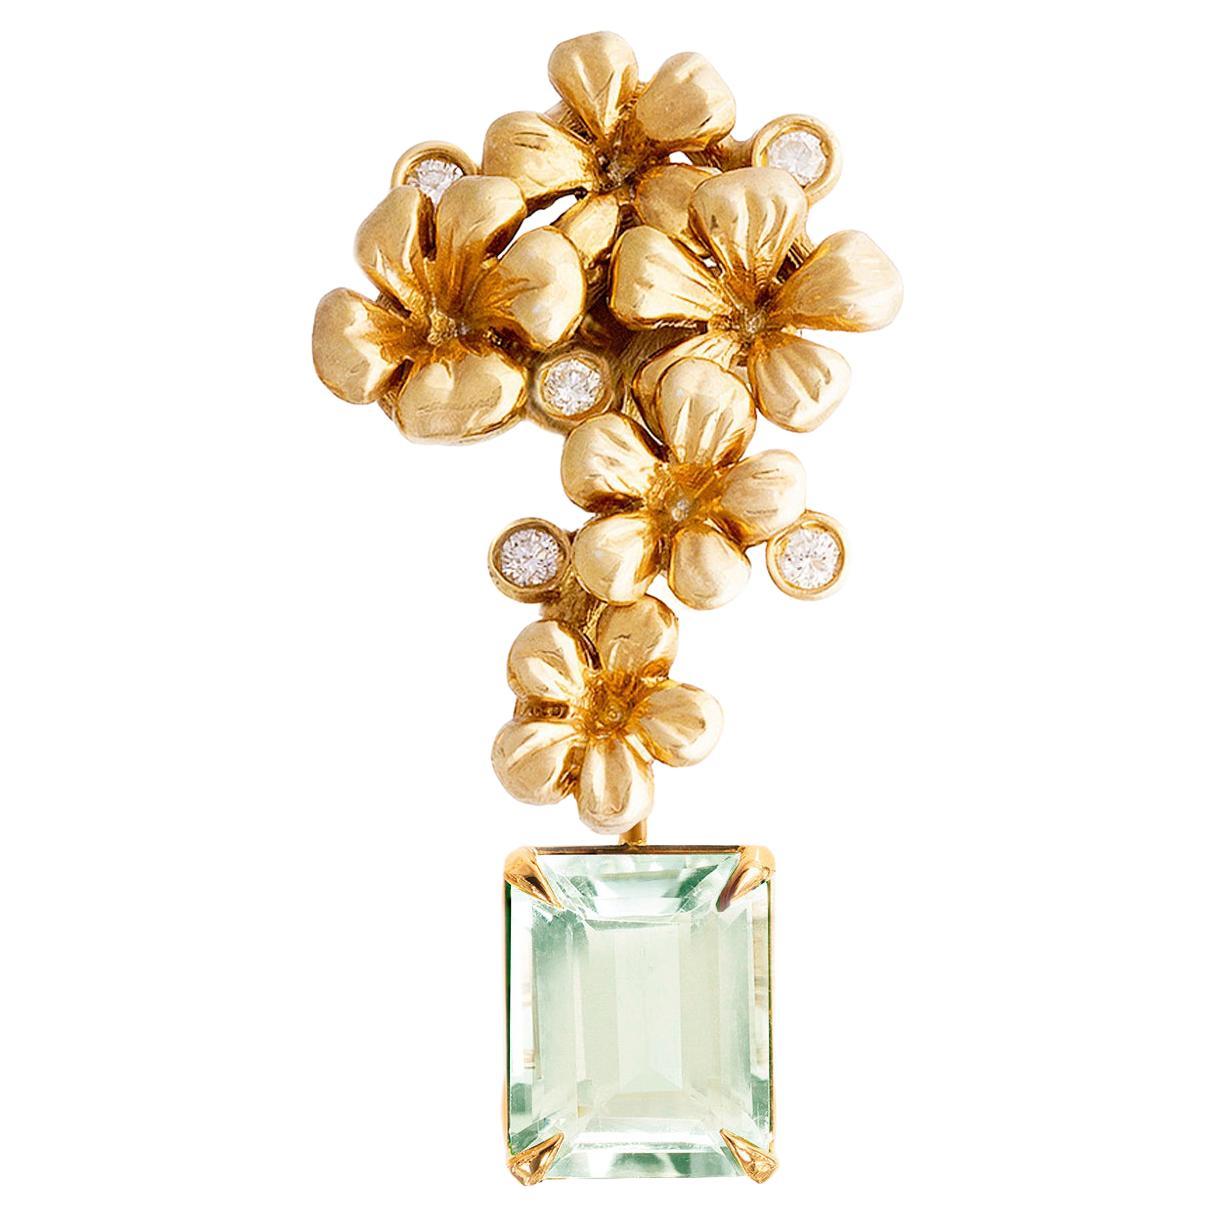 Floral Pendant Necklace in 18 Karat Yellow Gold with Diamonds and Green Quartz